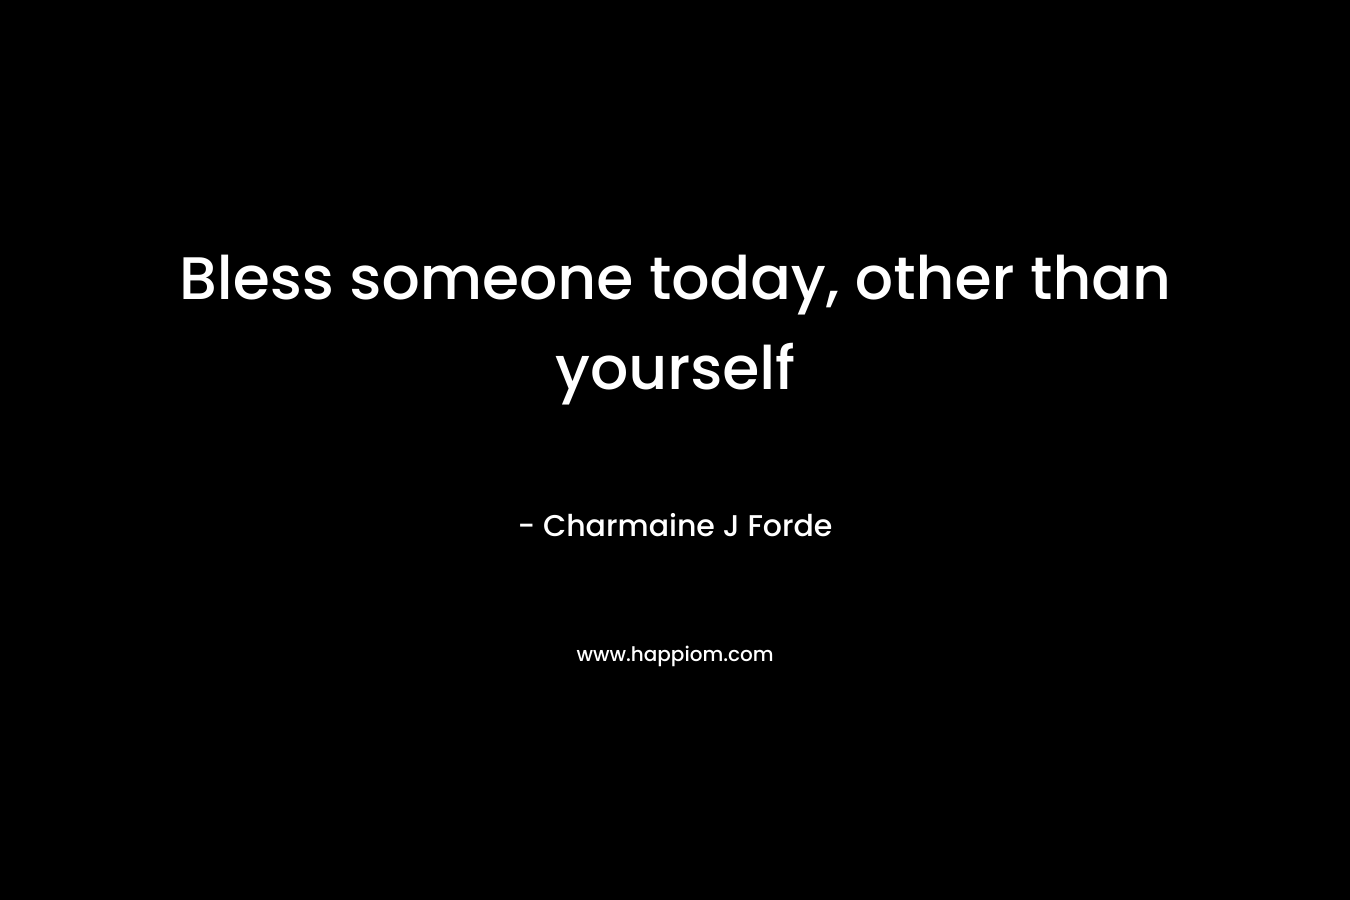 Bless someone today, other than yourself